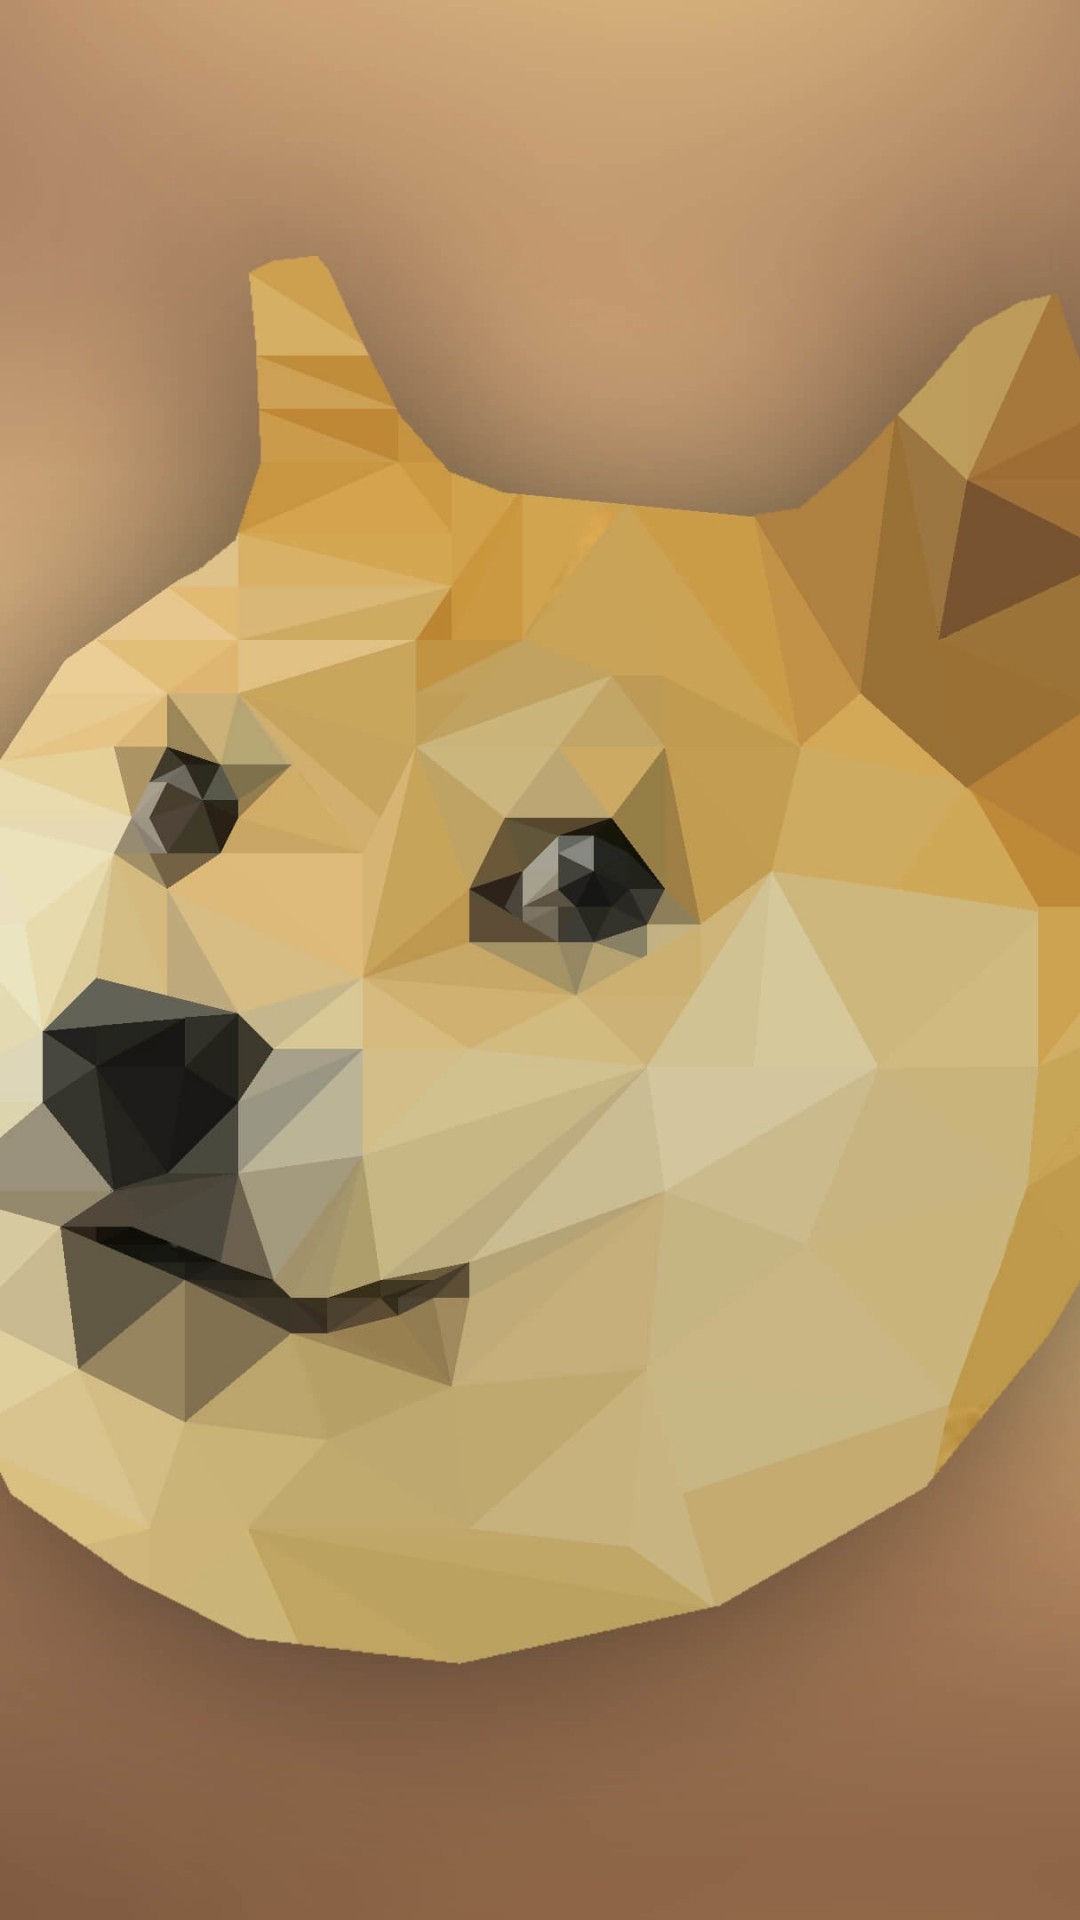 Low Poly Doge Wallpaper for HTC One